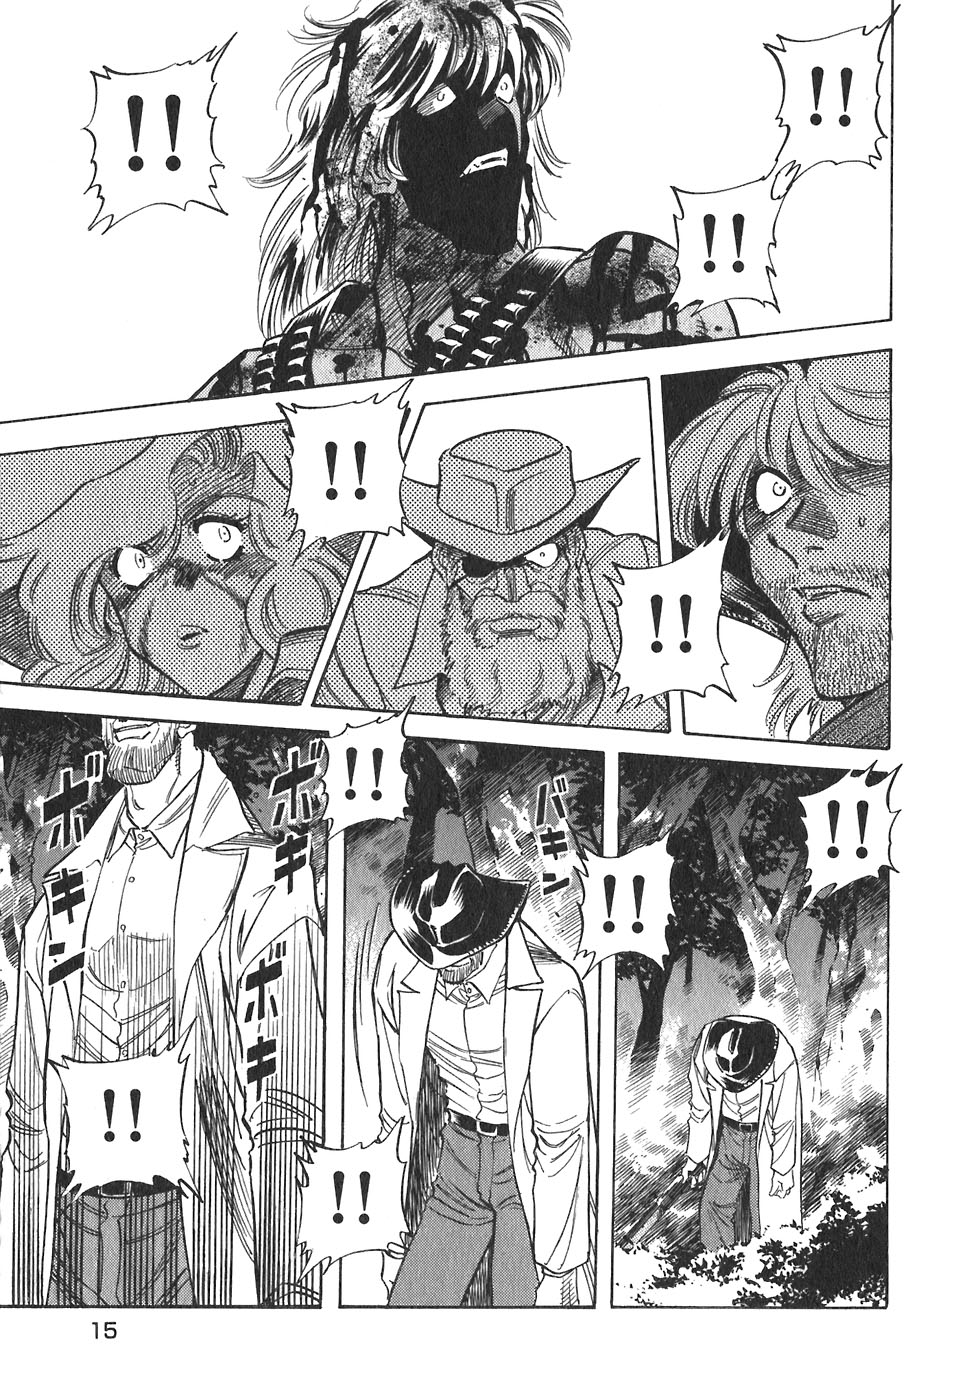 RED: Living on the Edge Vol. 11 Ch. 82 Cowboys From Hell 1